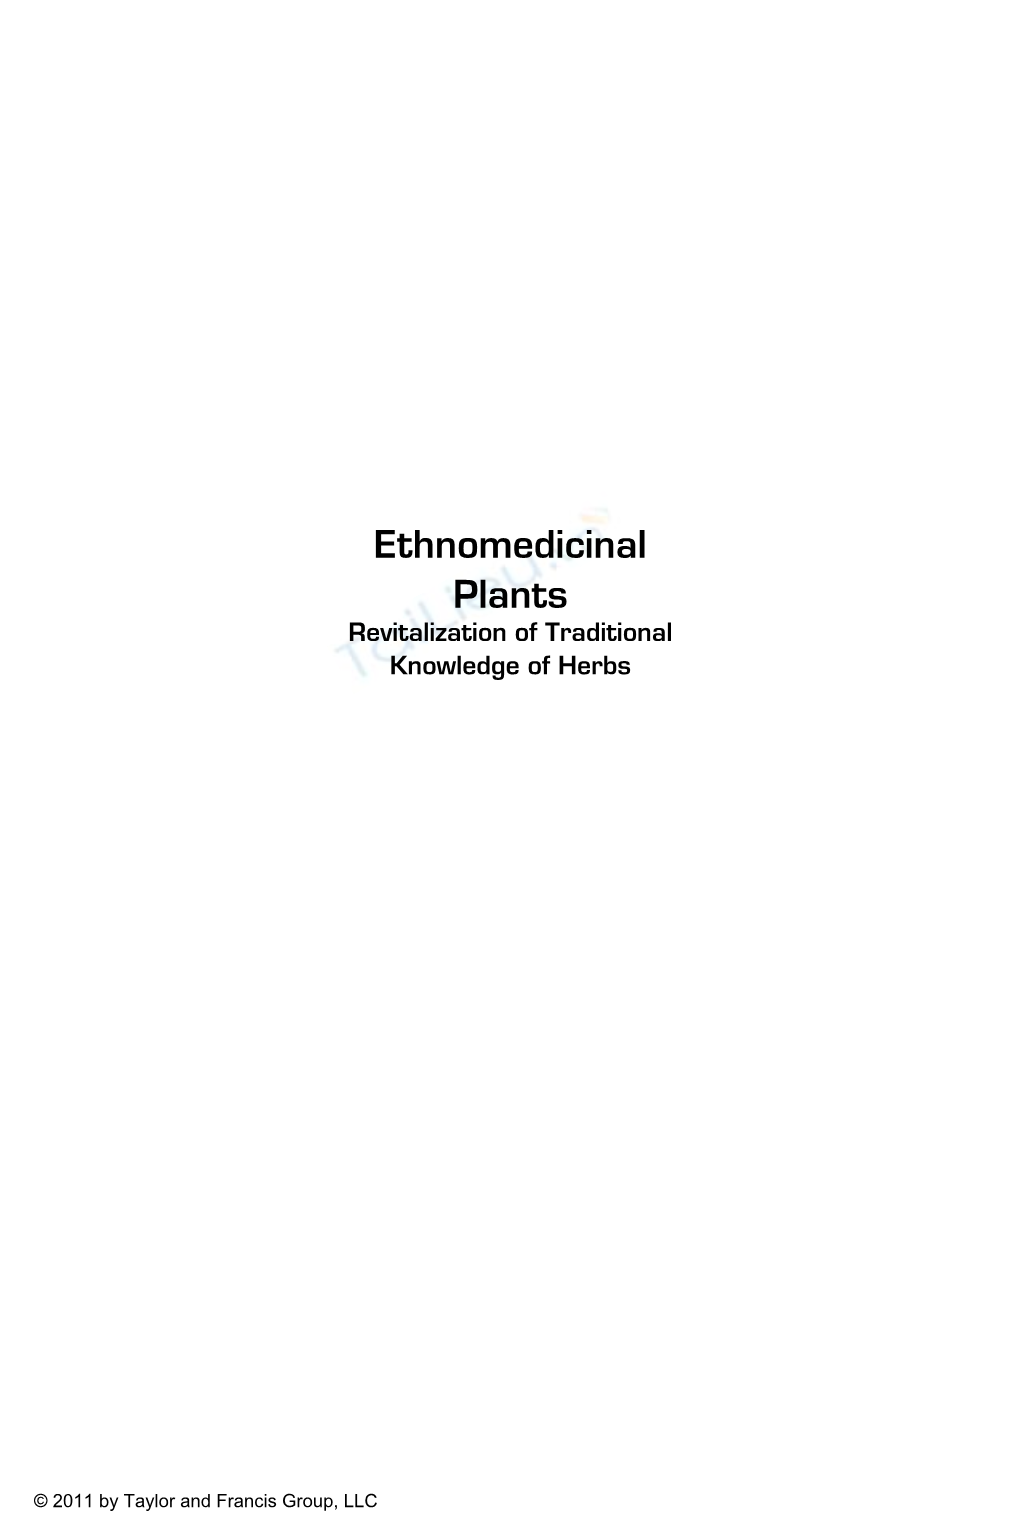 Ethnomedicinal Plants Revitalization of Traditional Knowledge of Herbs